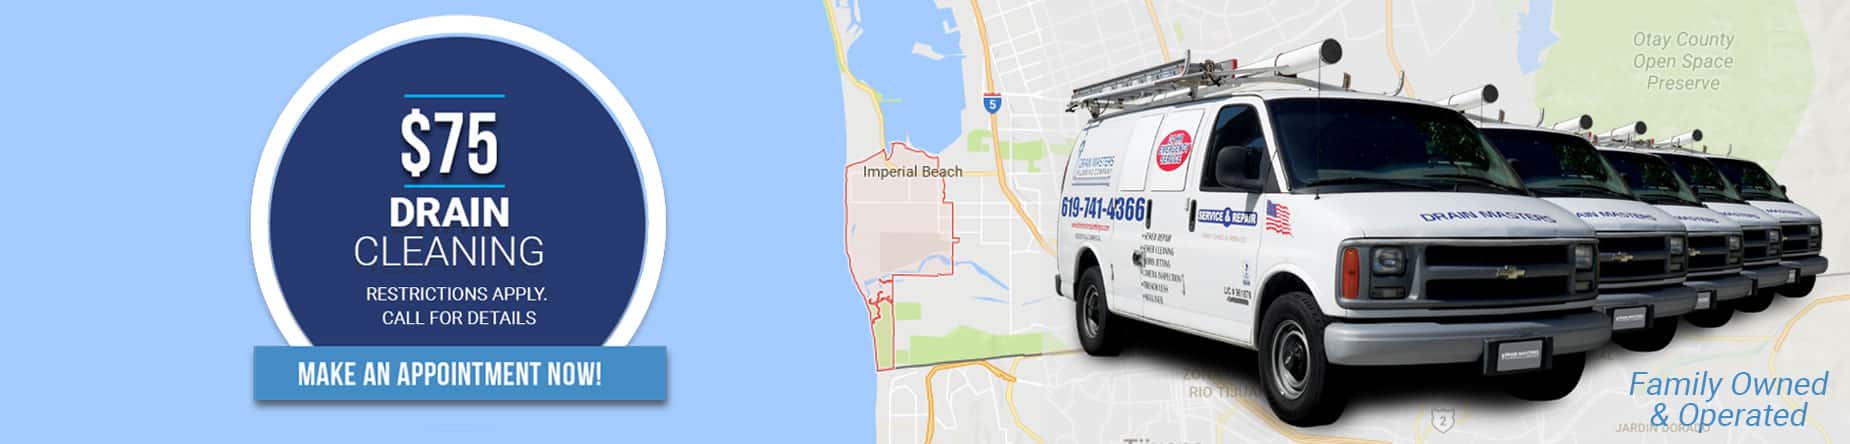 imperial beach plumbing services